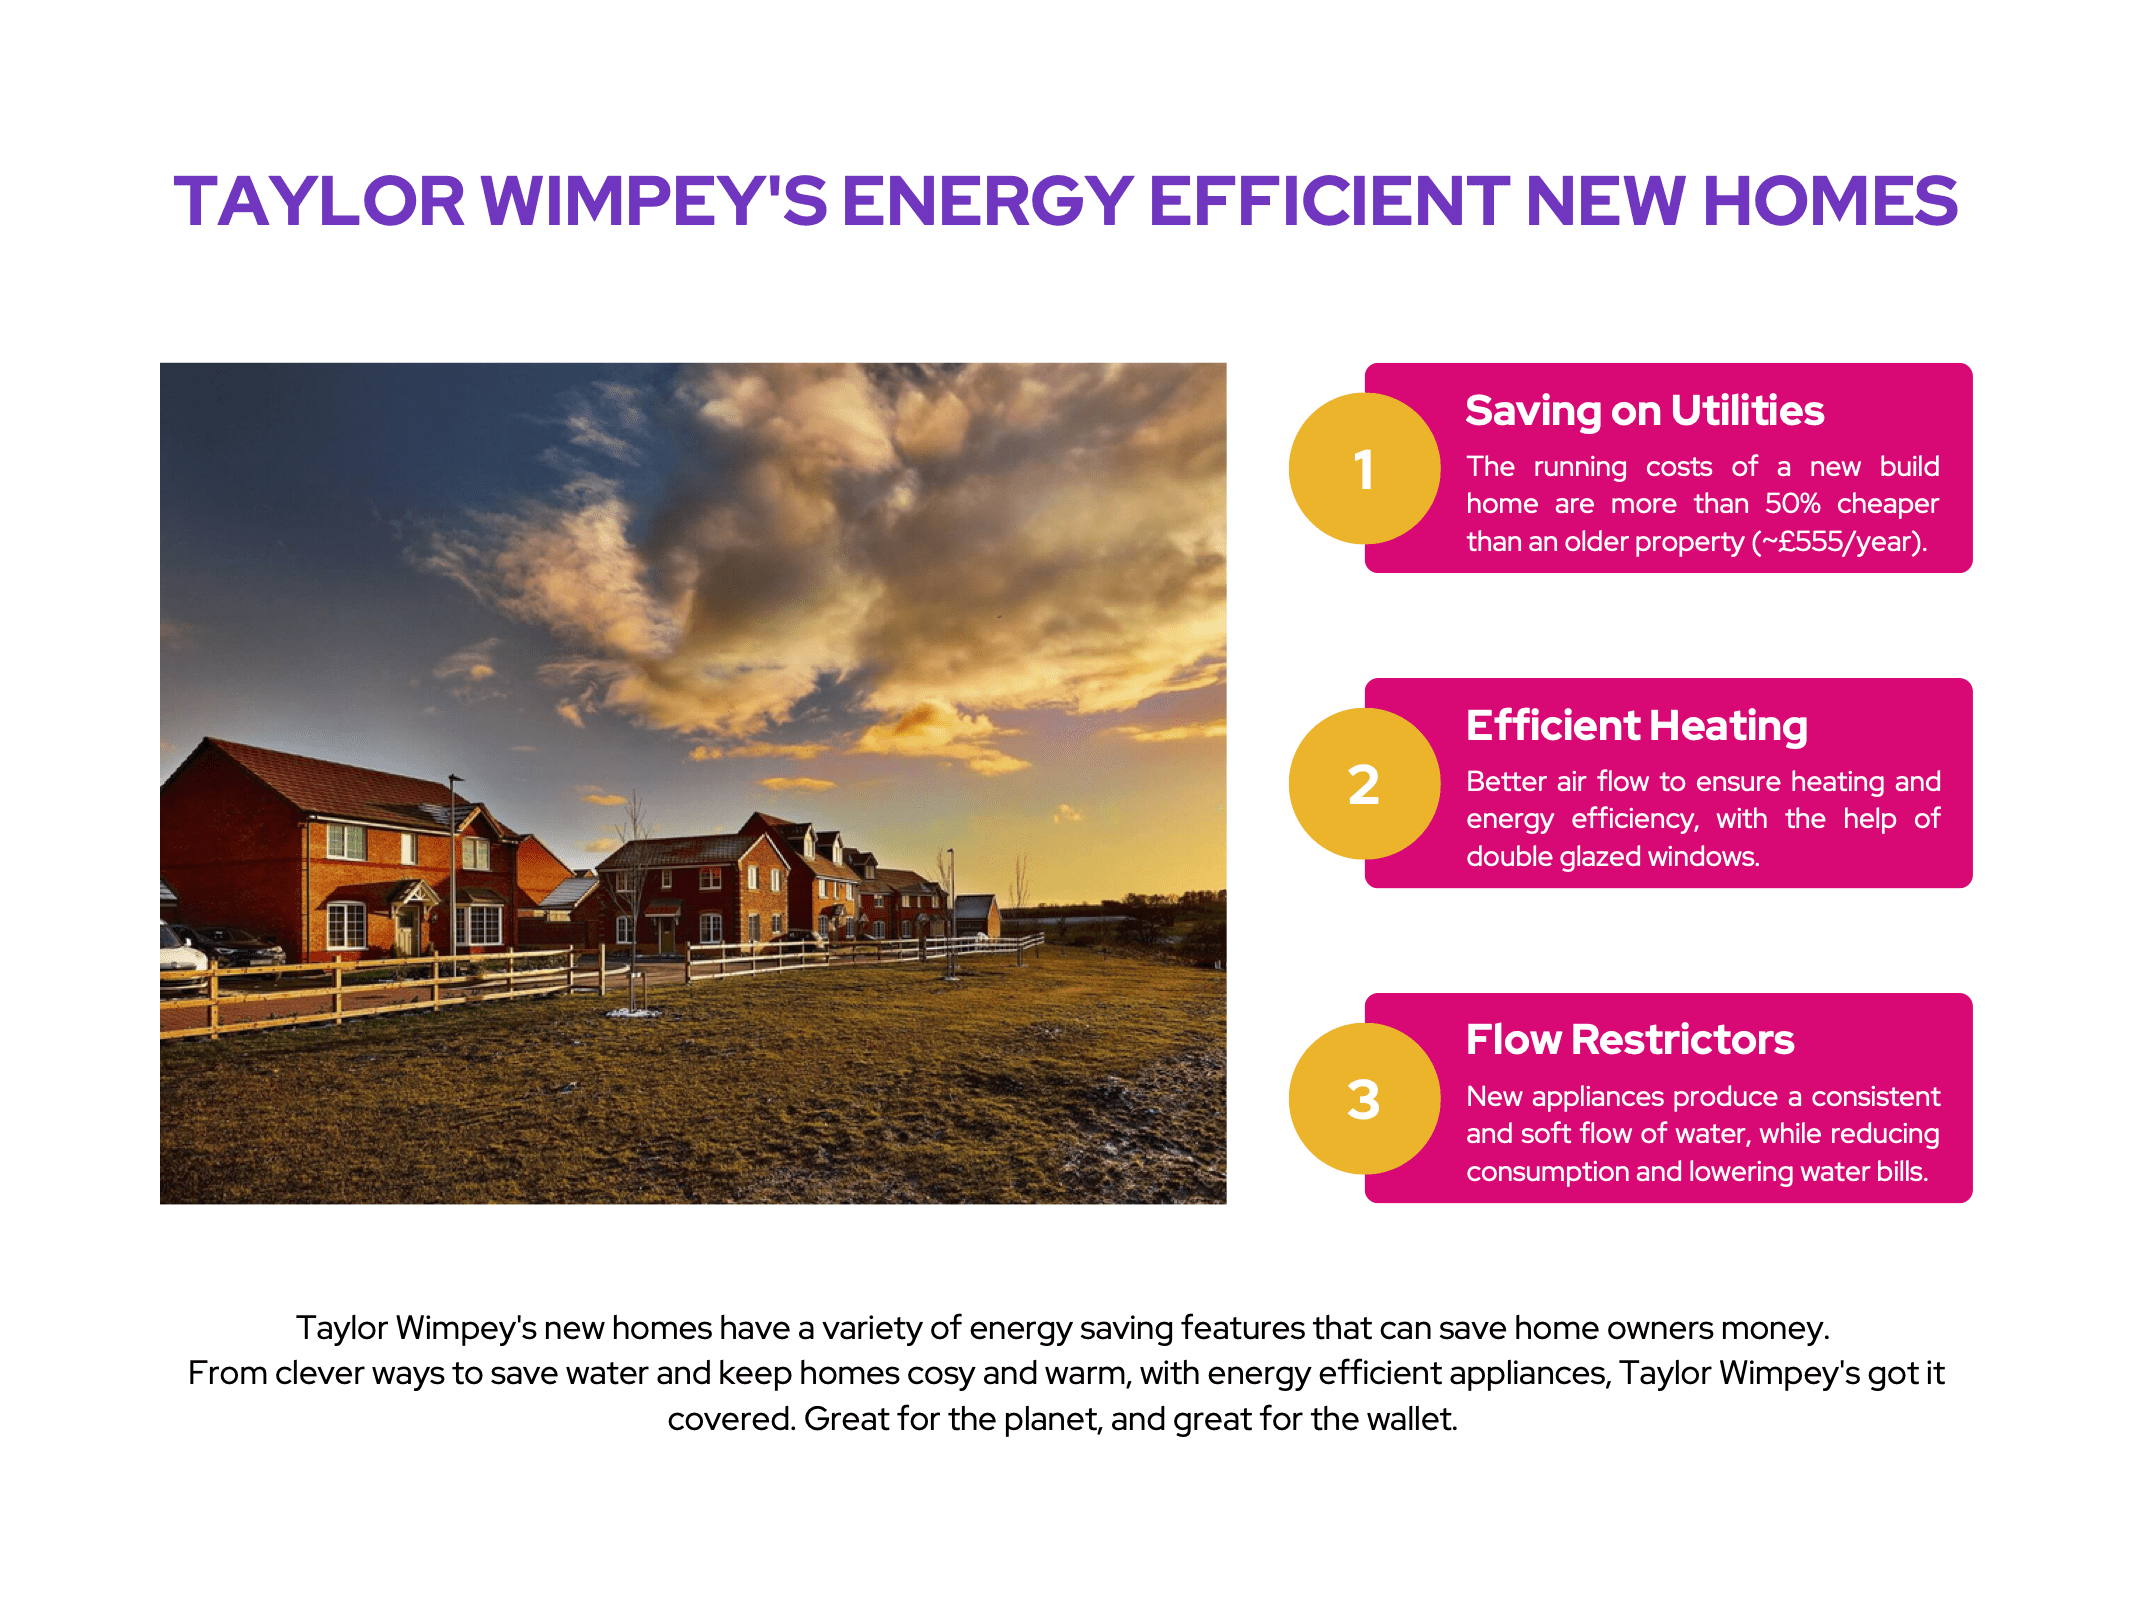 Taylor Wimpey: Taylor Wimpey's Energy Efficient New Homes